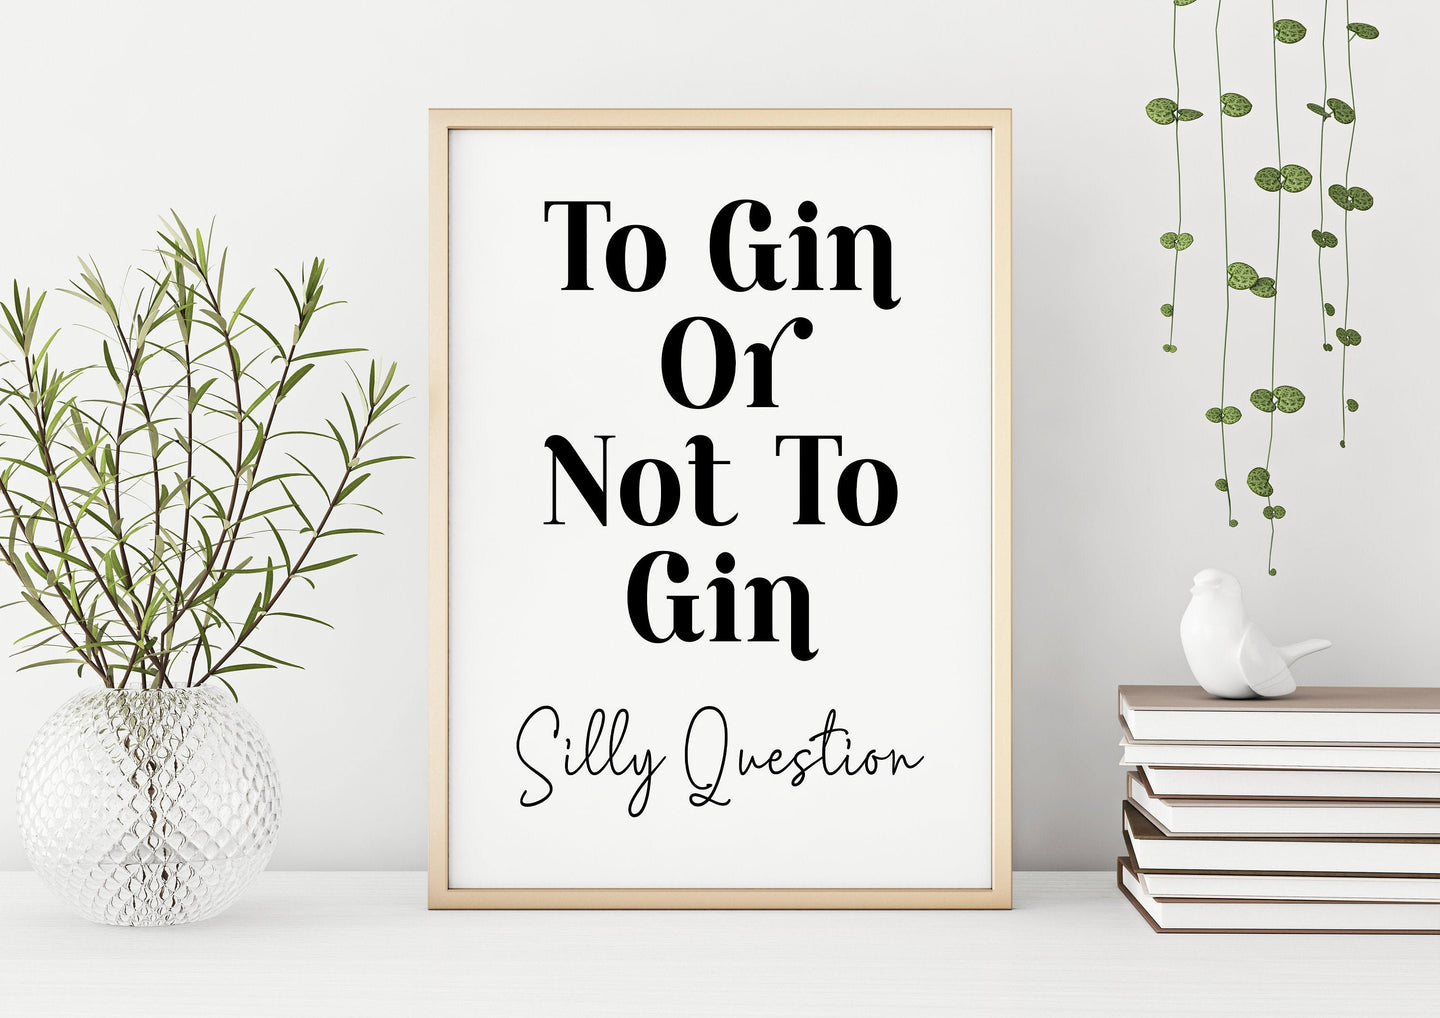 To Gin Or Not To Gin - Silly Question - Funny drinking print for Home, bar, pub, kitchen wall art gin lover gift - Unframed print